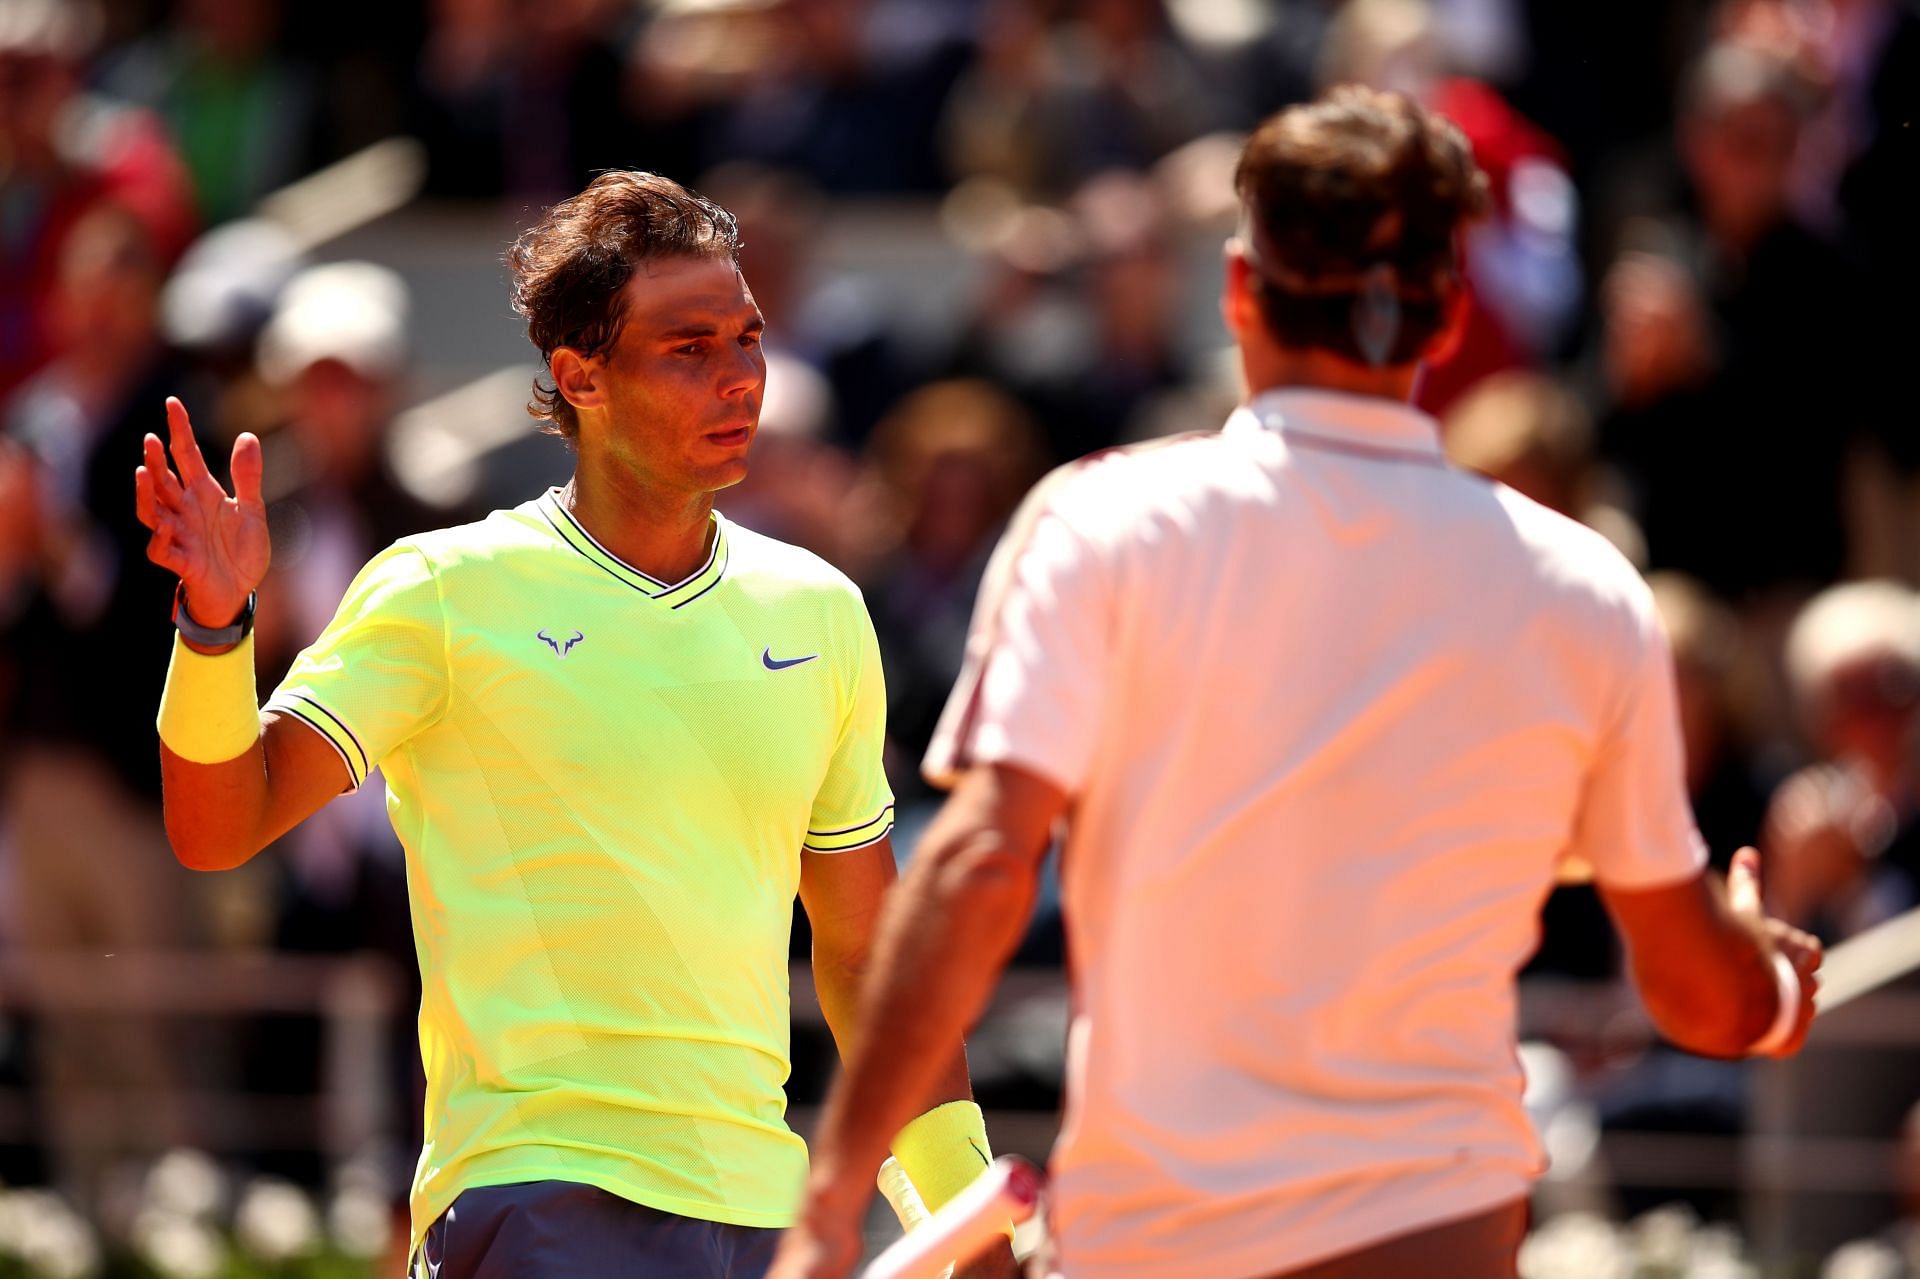 Rafael Nadal and Roger Federer after their French Open 2019 semifinal